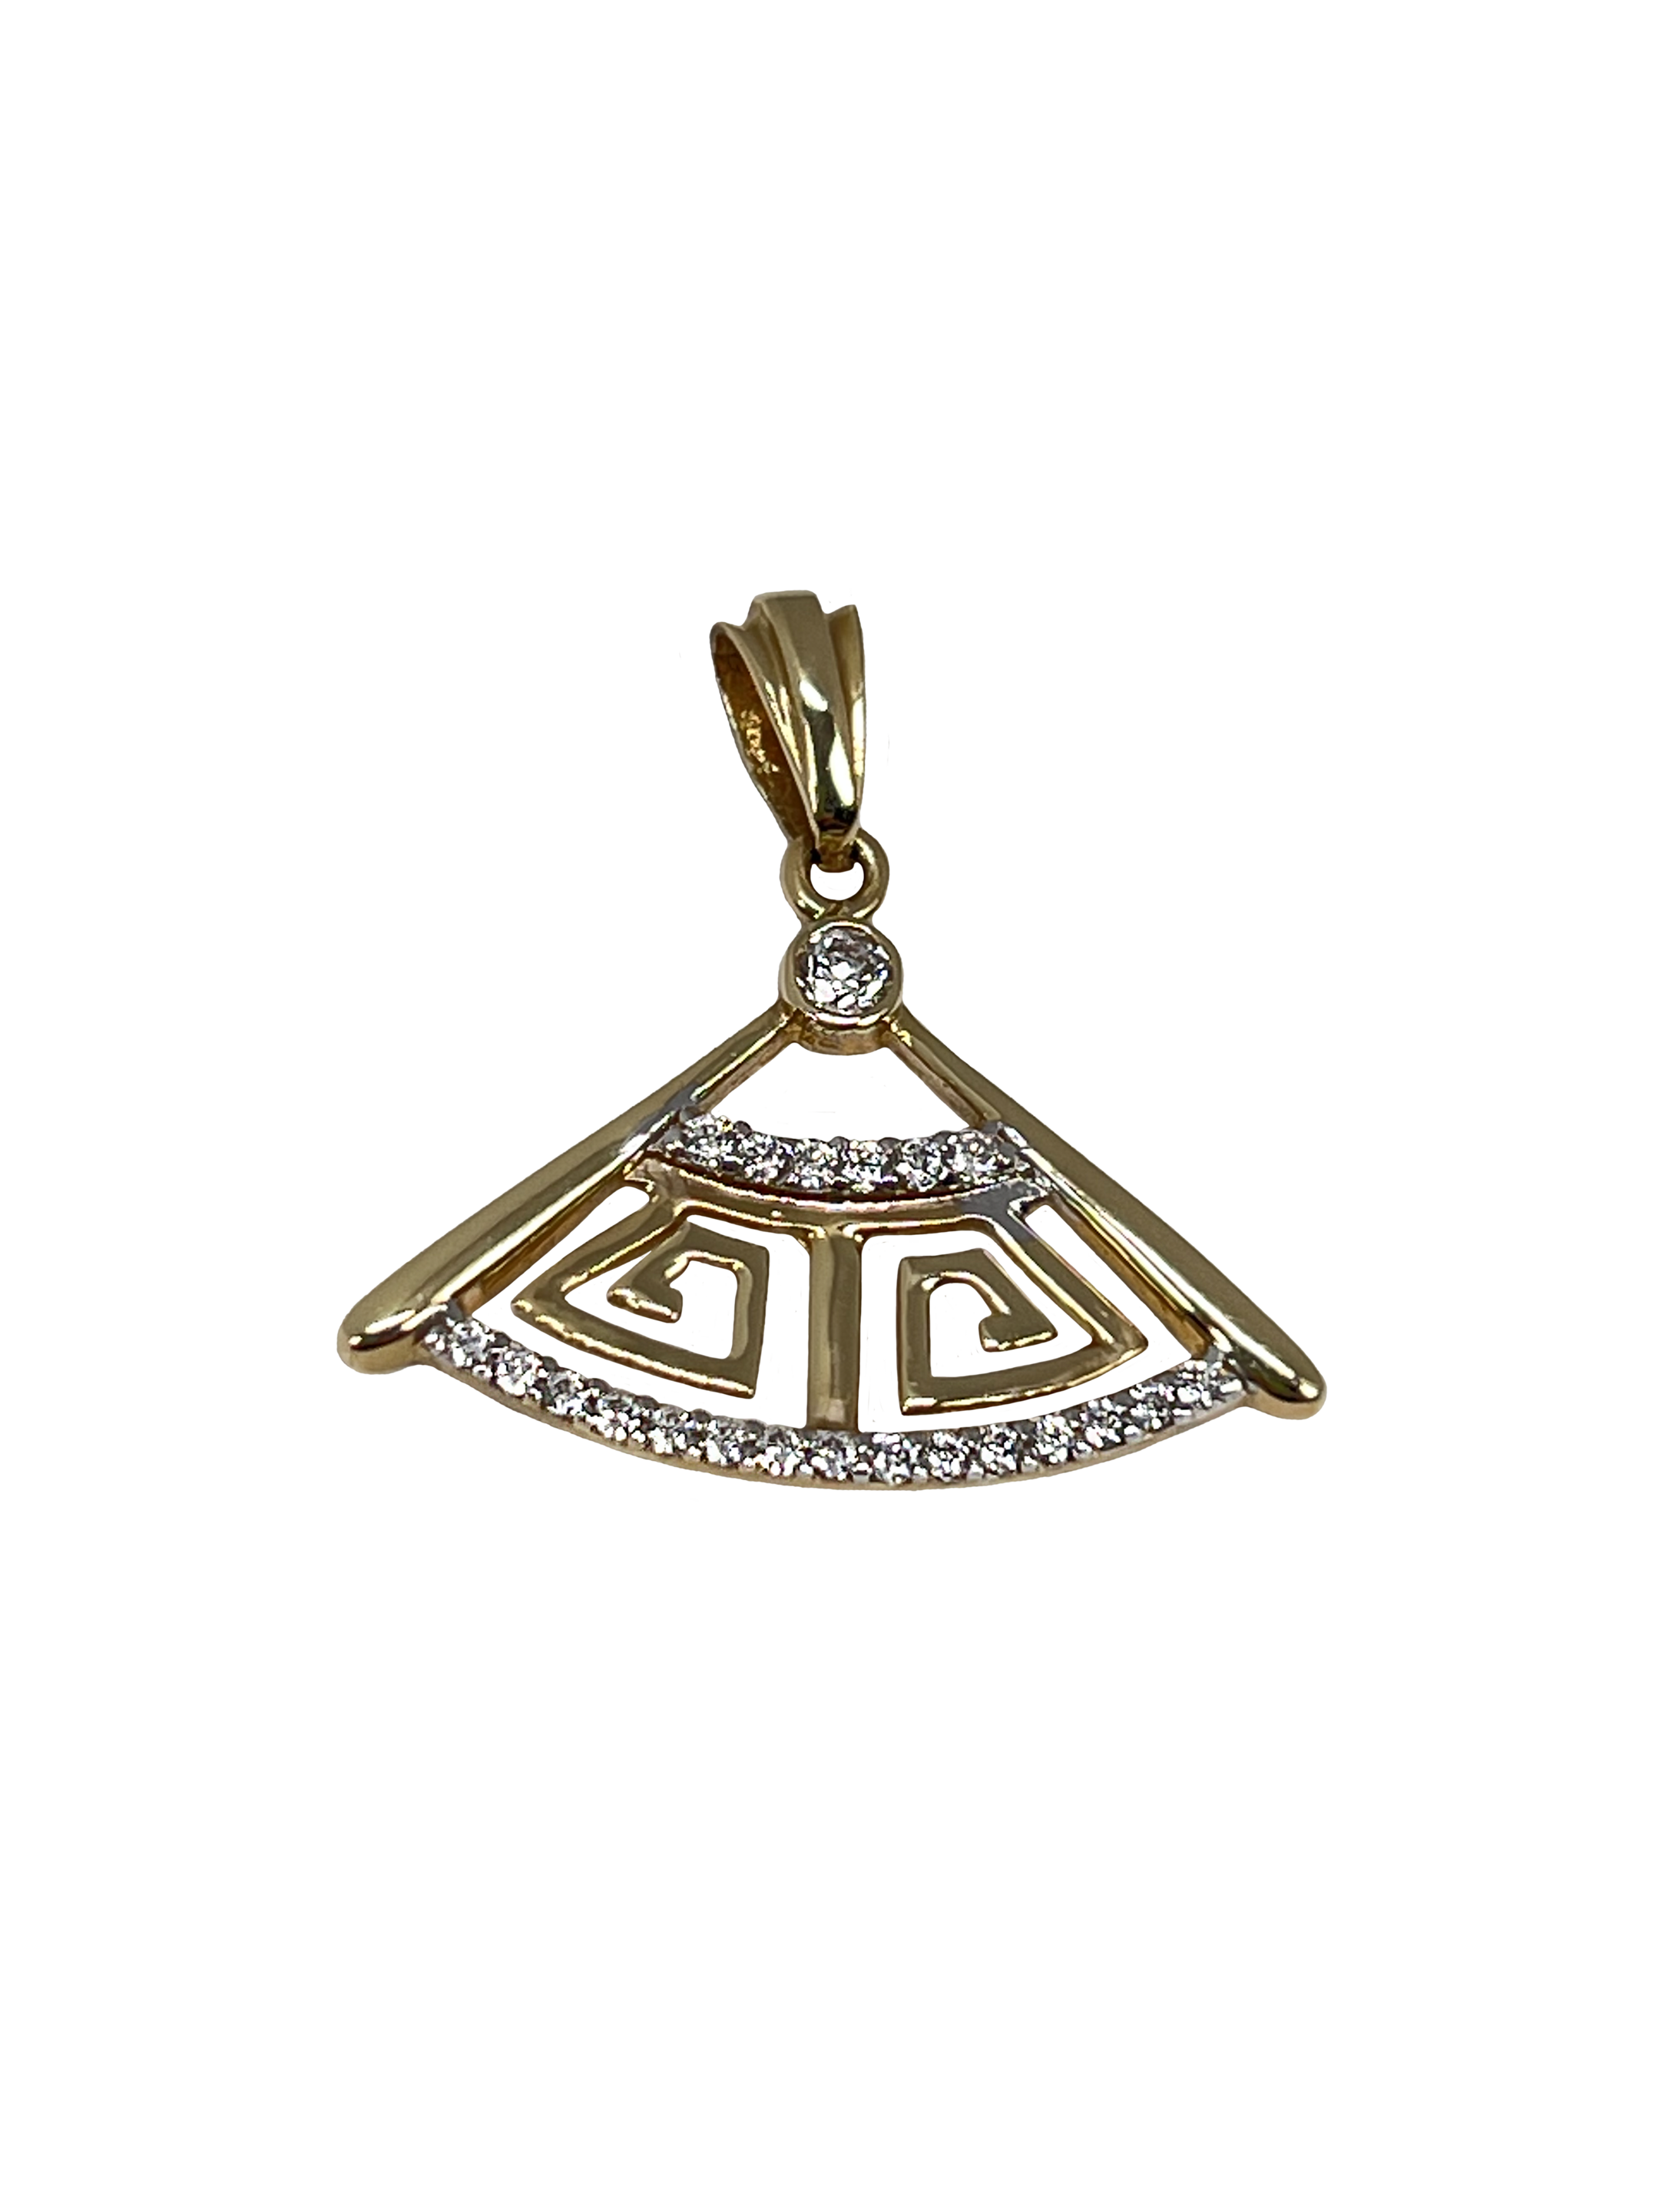 Gold pendant with antique patterns and zircons